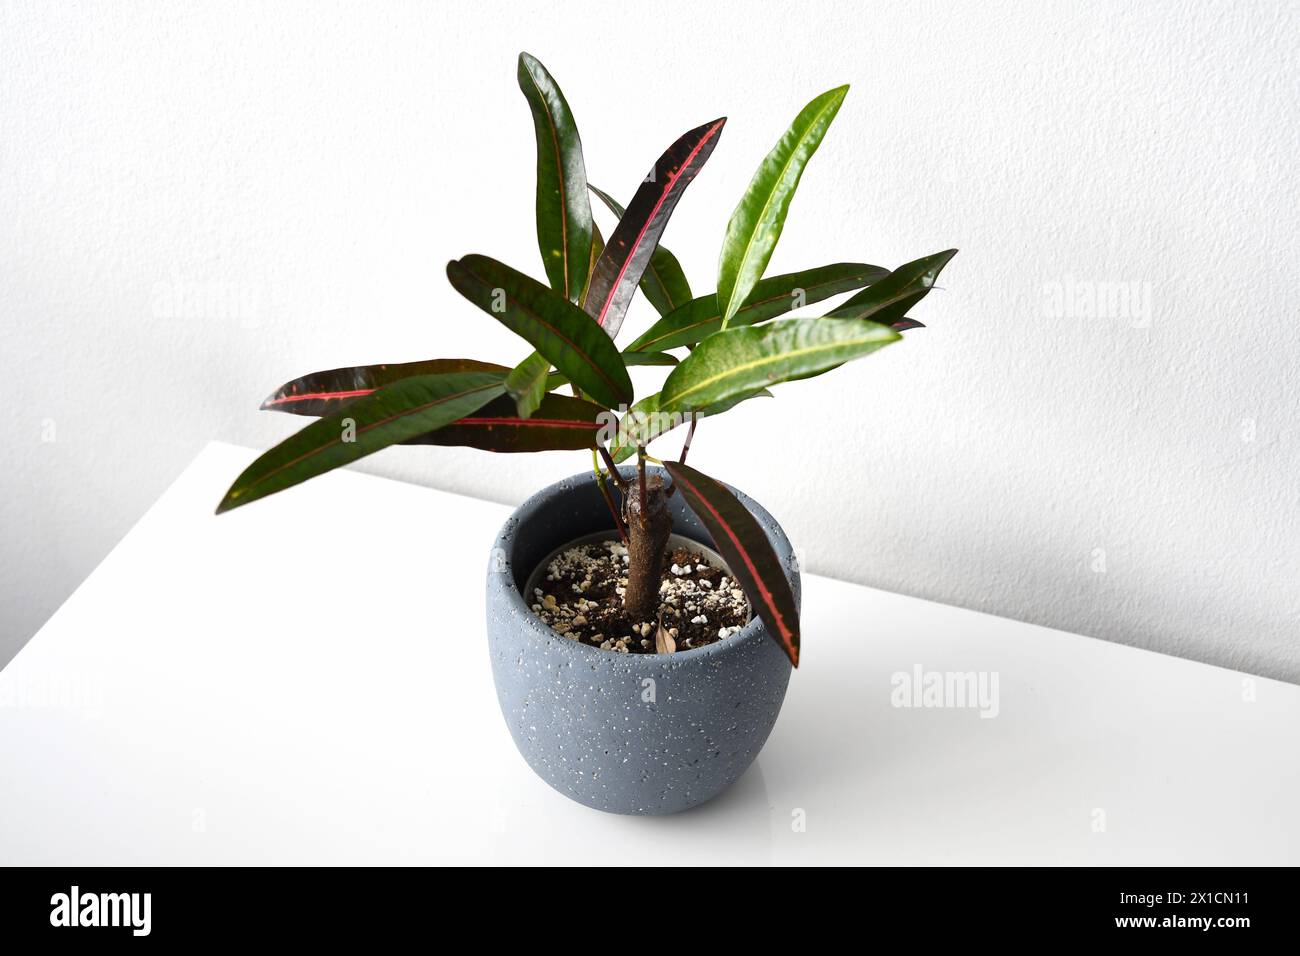 Croton (codiaeum variegatum) with yellow and red variegation, on a white and black background. Houseplant in gray ceramic pot. Long and thin leaves. Stock Photo